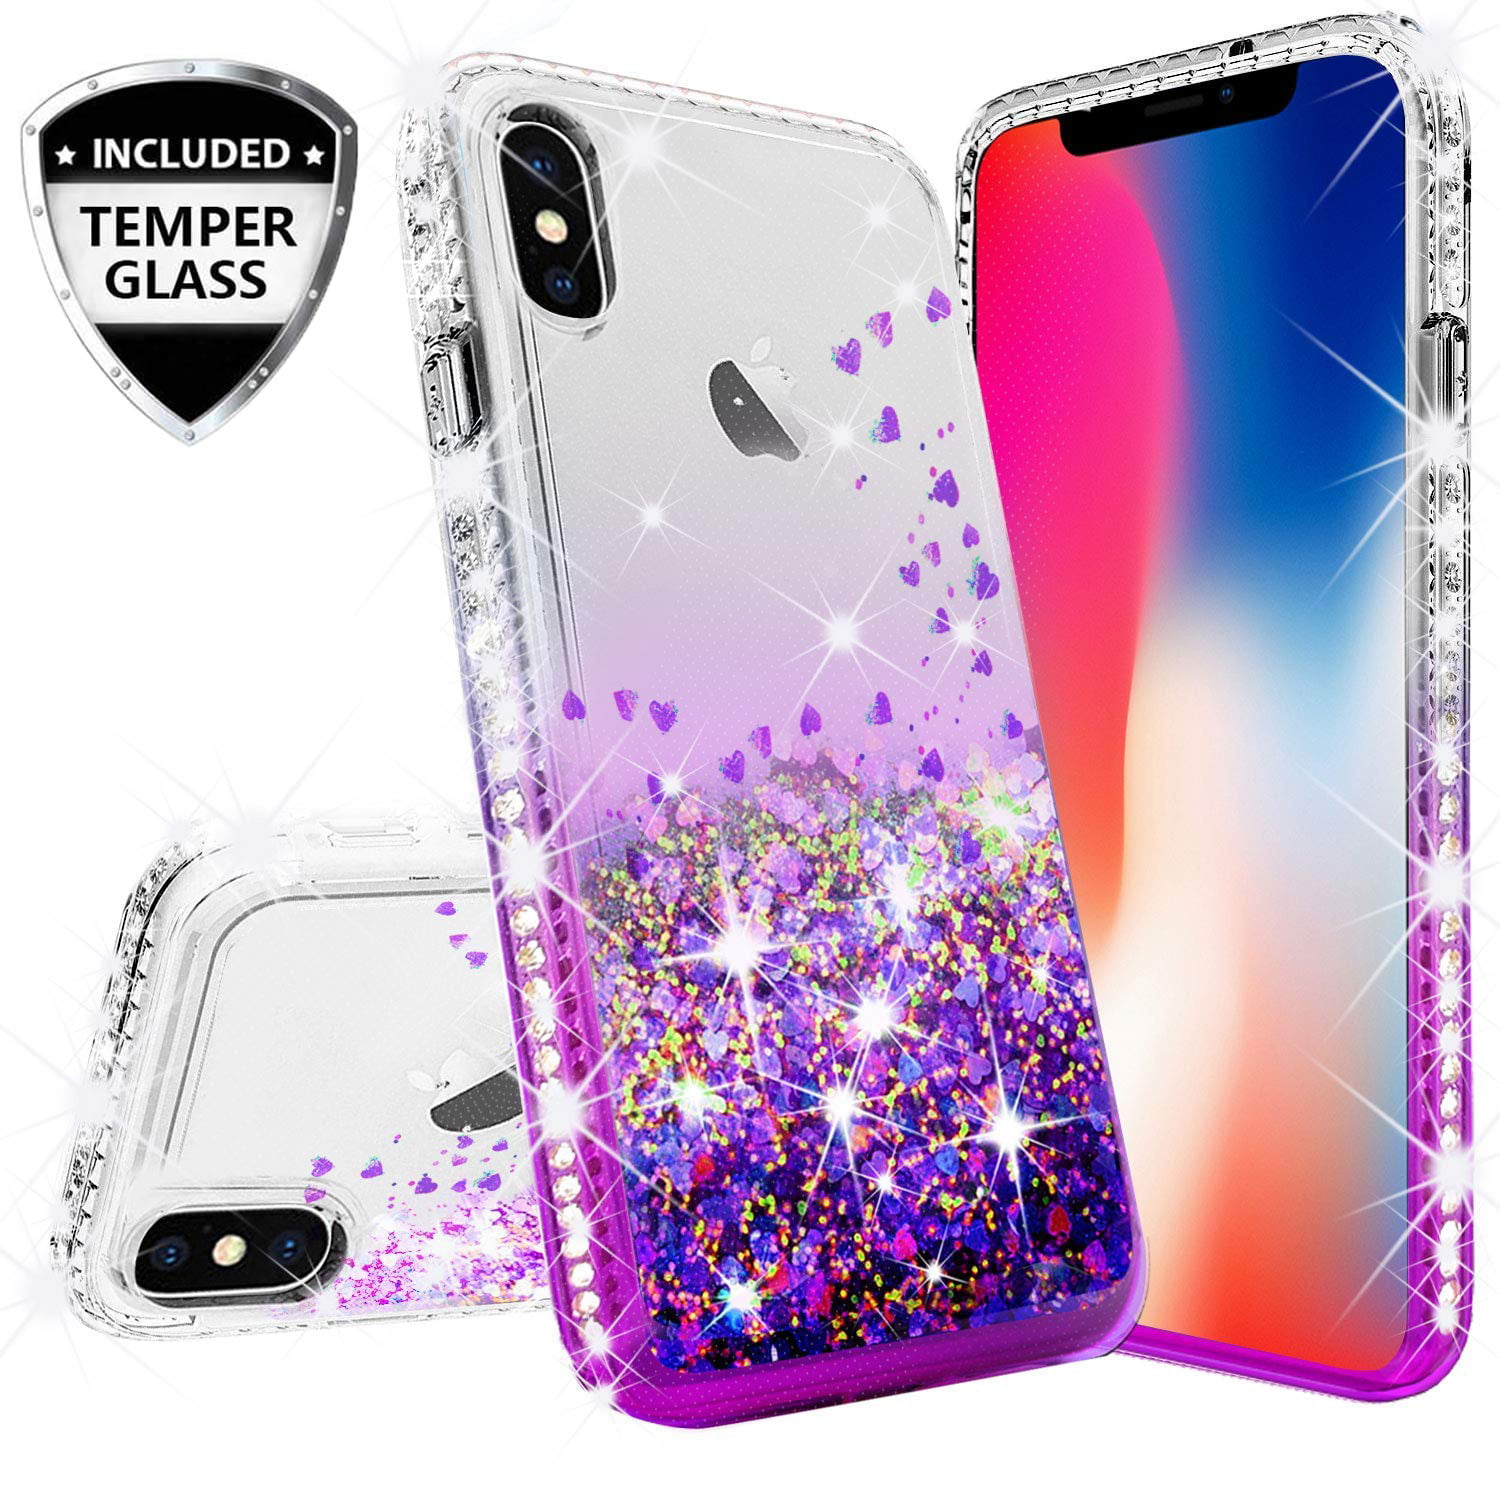 Compatible for Apple iPhone XR Case, with [Temper Glass Screen Protector] SOGA Diamond Glitter Liquid Quicksand Cover Cute Girl Women Phone Case for iPhone XR 6.1 [Cear/Purple]